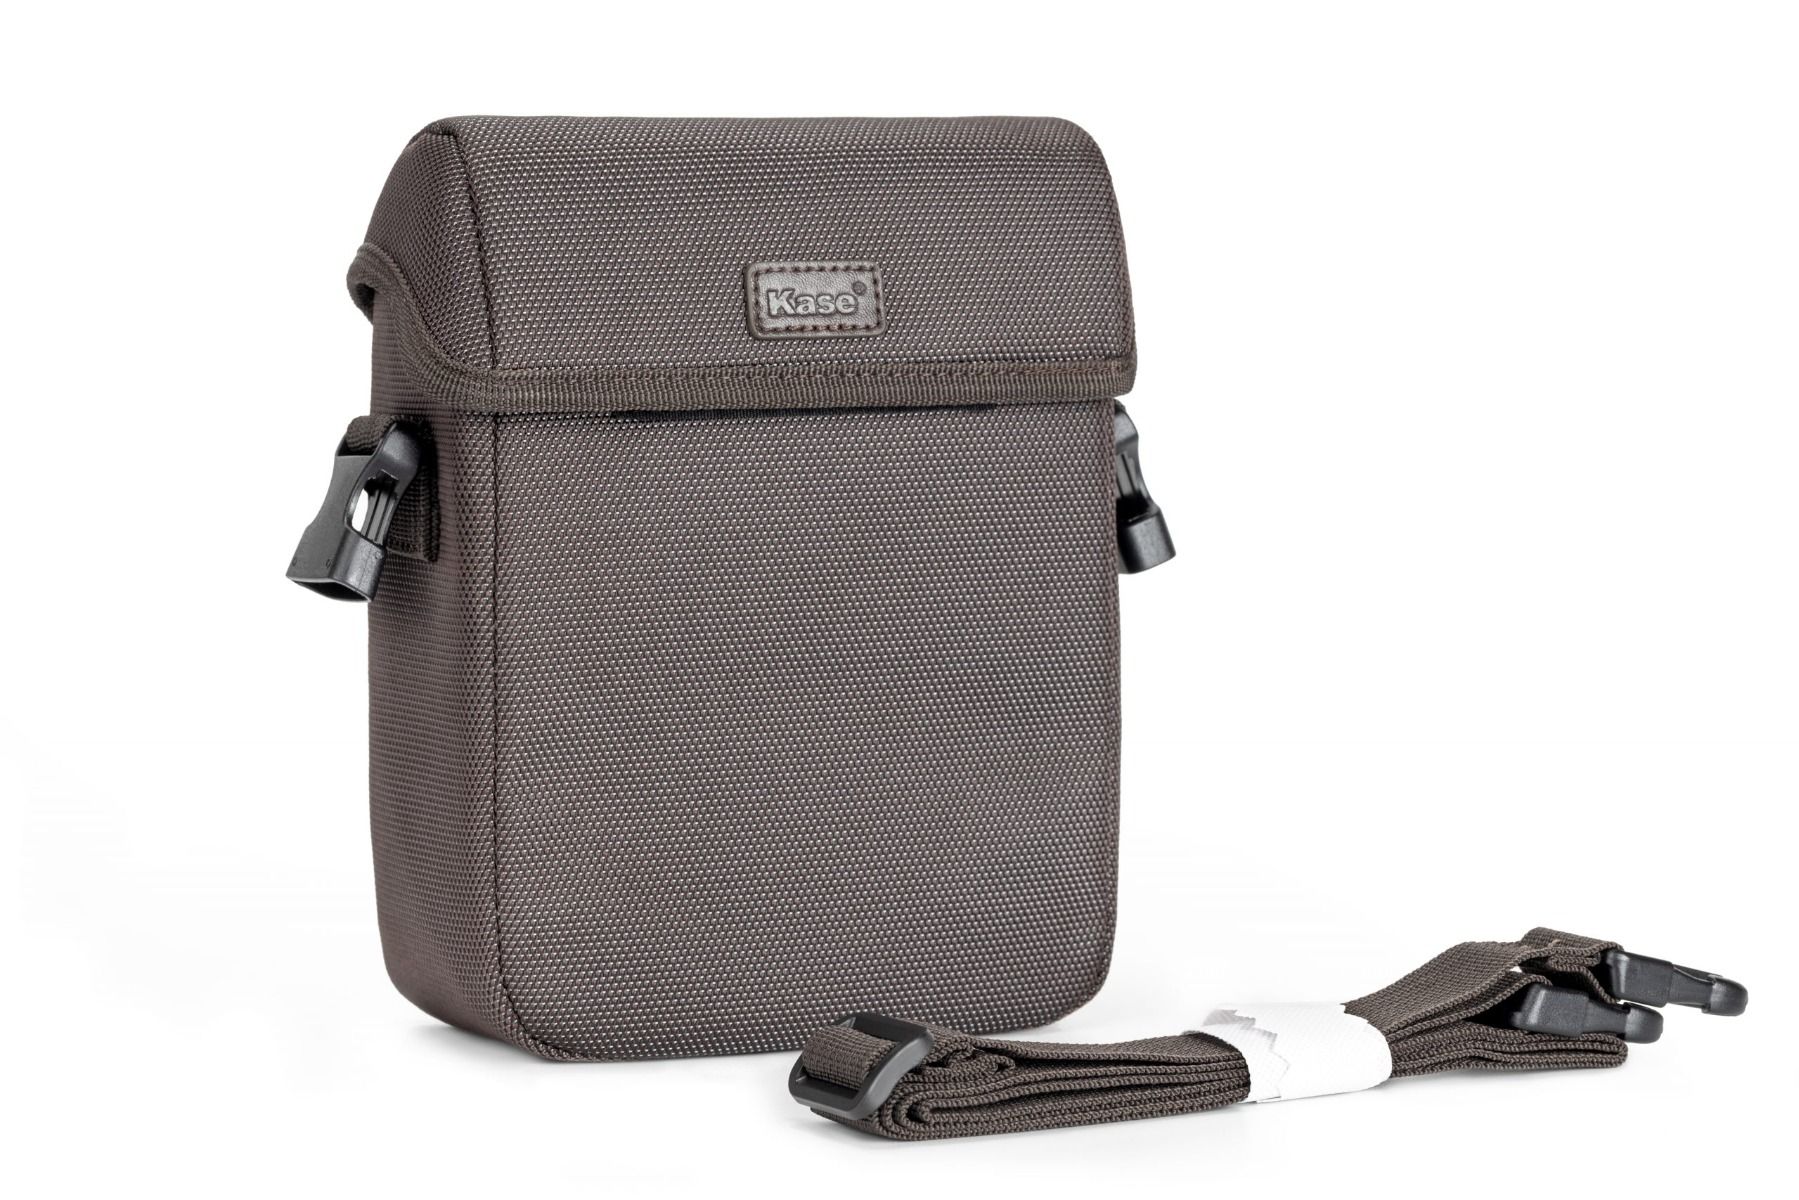 Product Image of Kase Armour Soft Filter case Bag